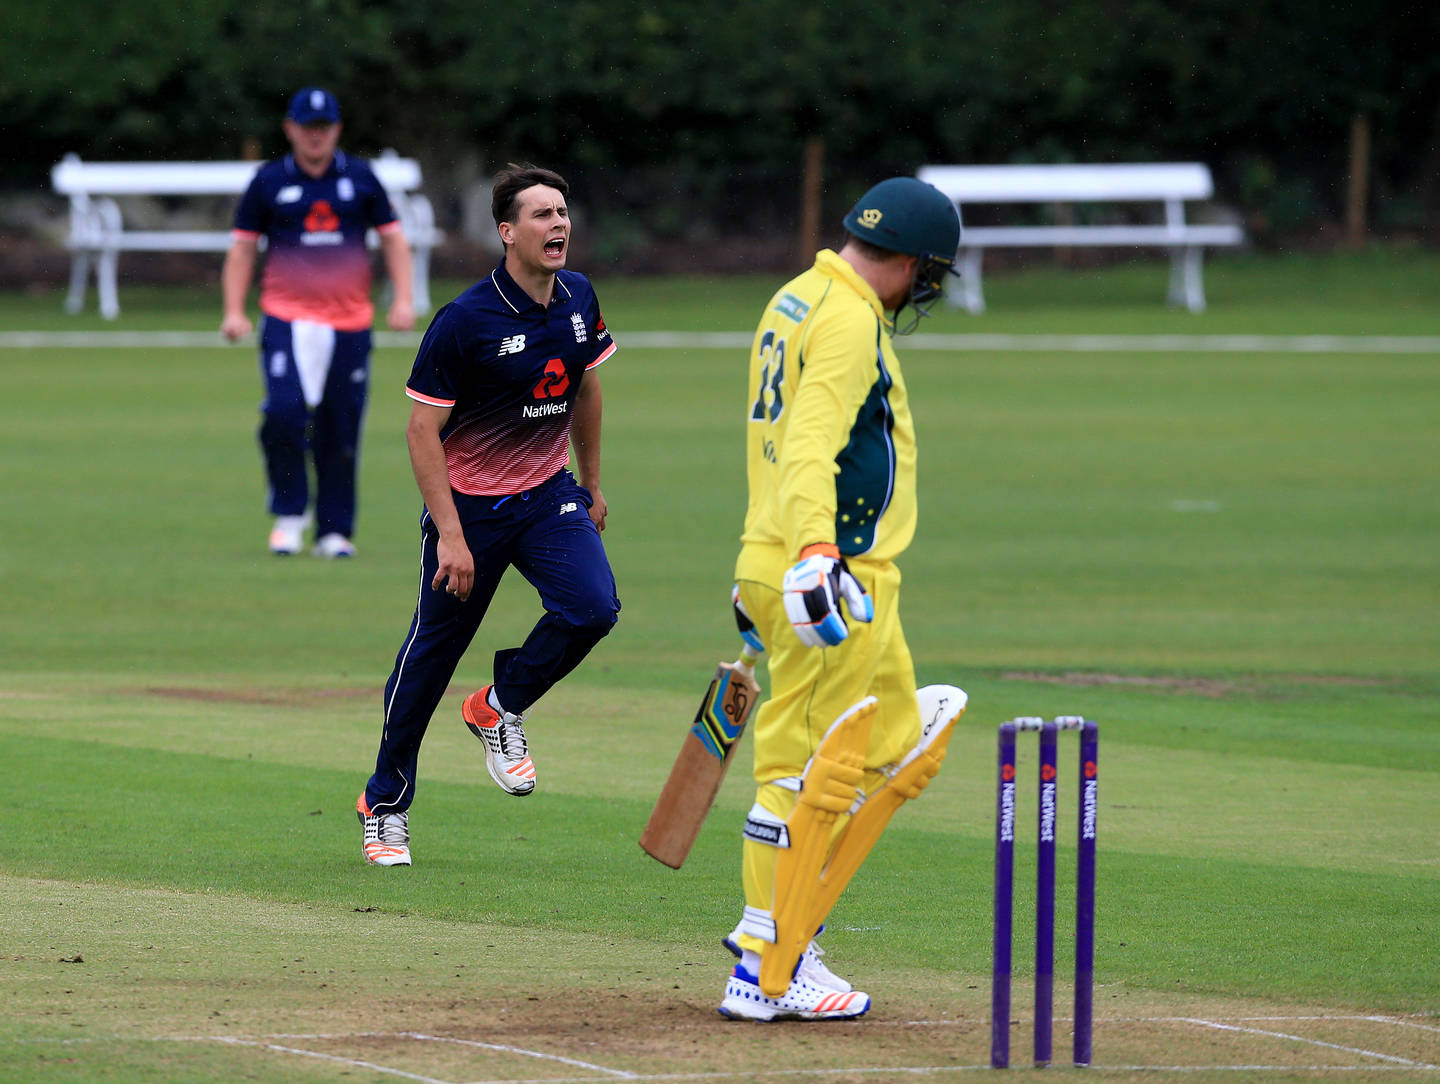 Taylor Young celebrates the wicket of Brett Wilson